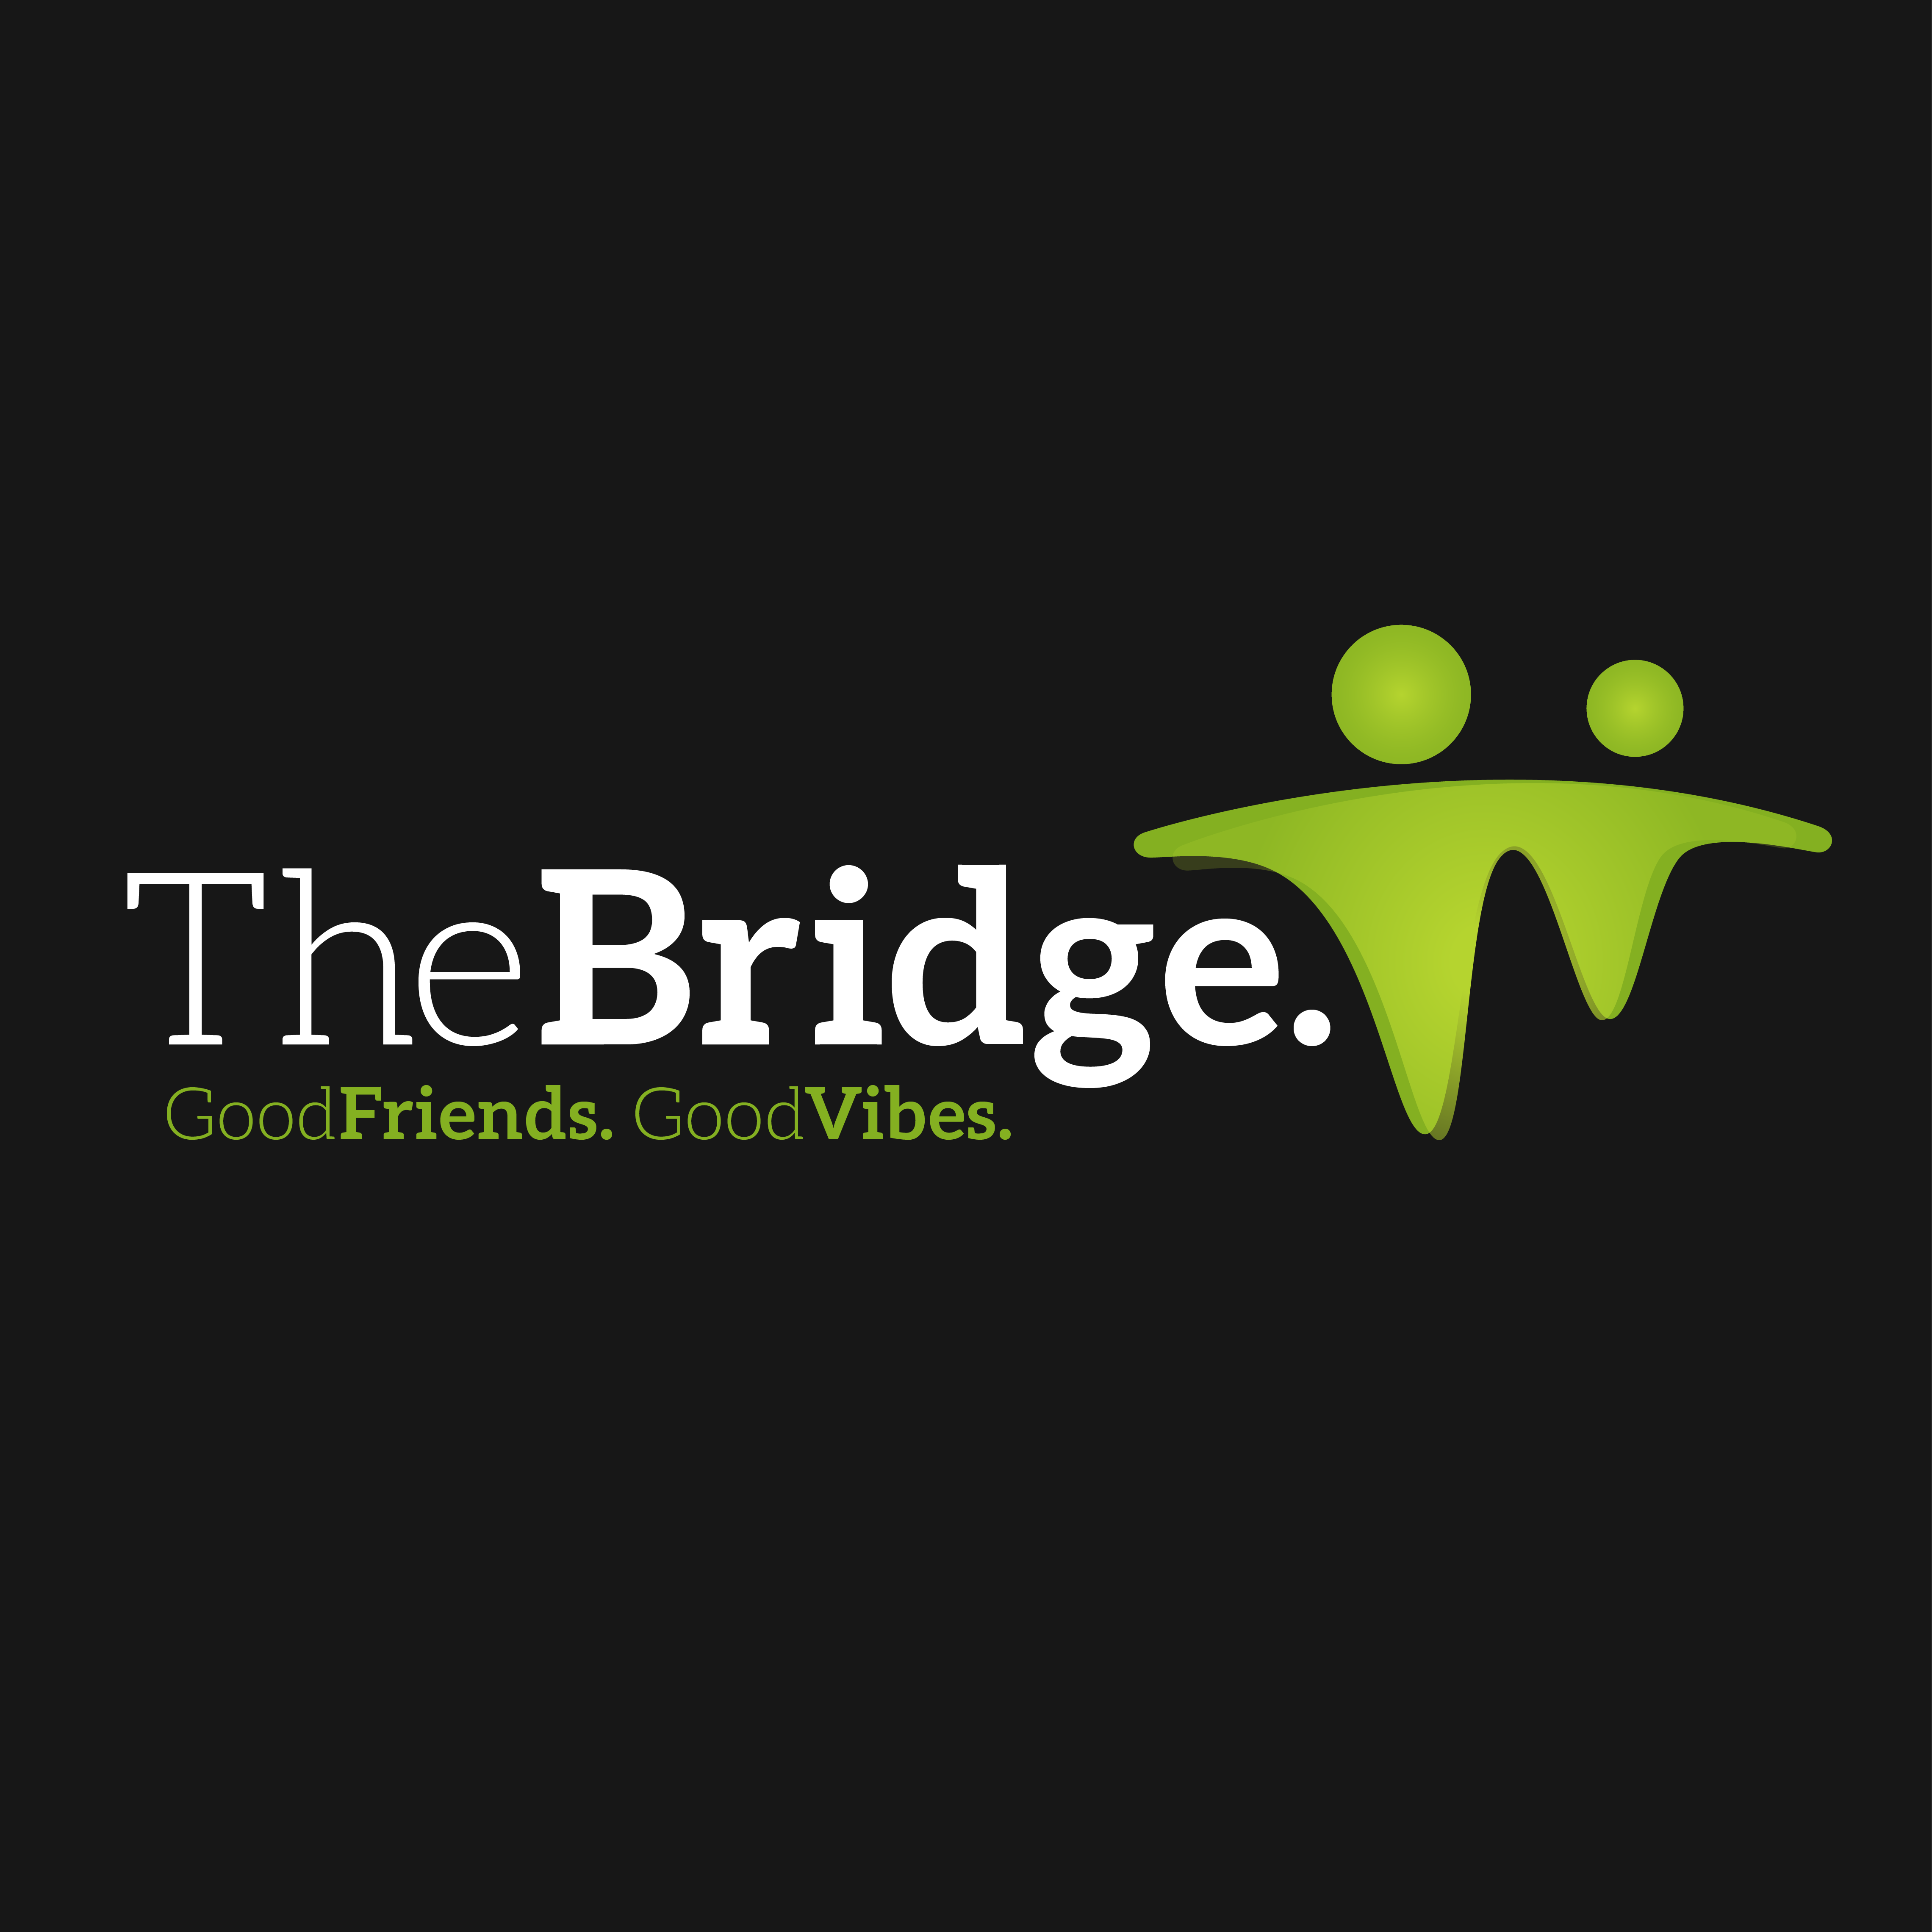 The Bridge, Ebbw Vales’ quirky alternative bar & Venue, hosts exceptional entertainment, good food and drink with a warm, friendly atmosphere at its heart.